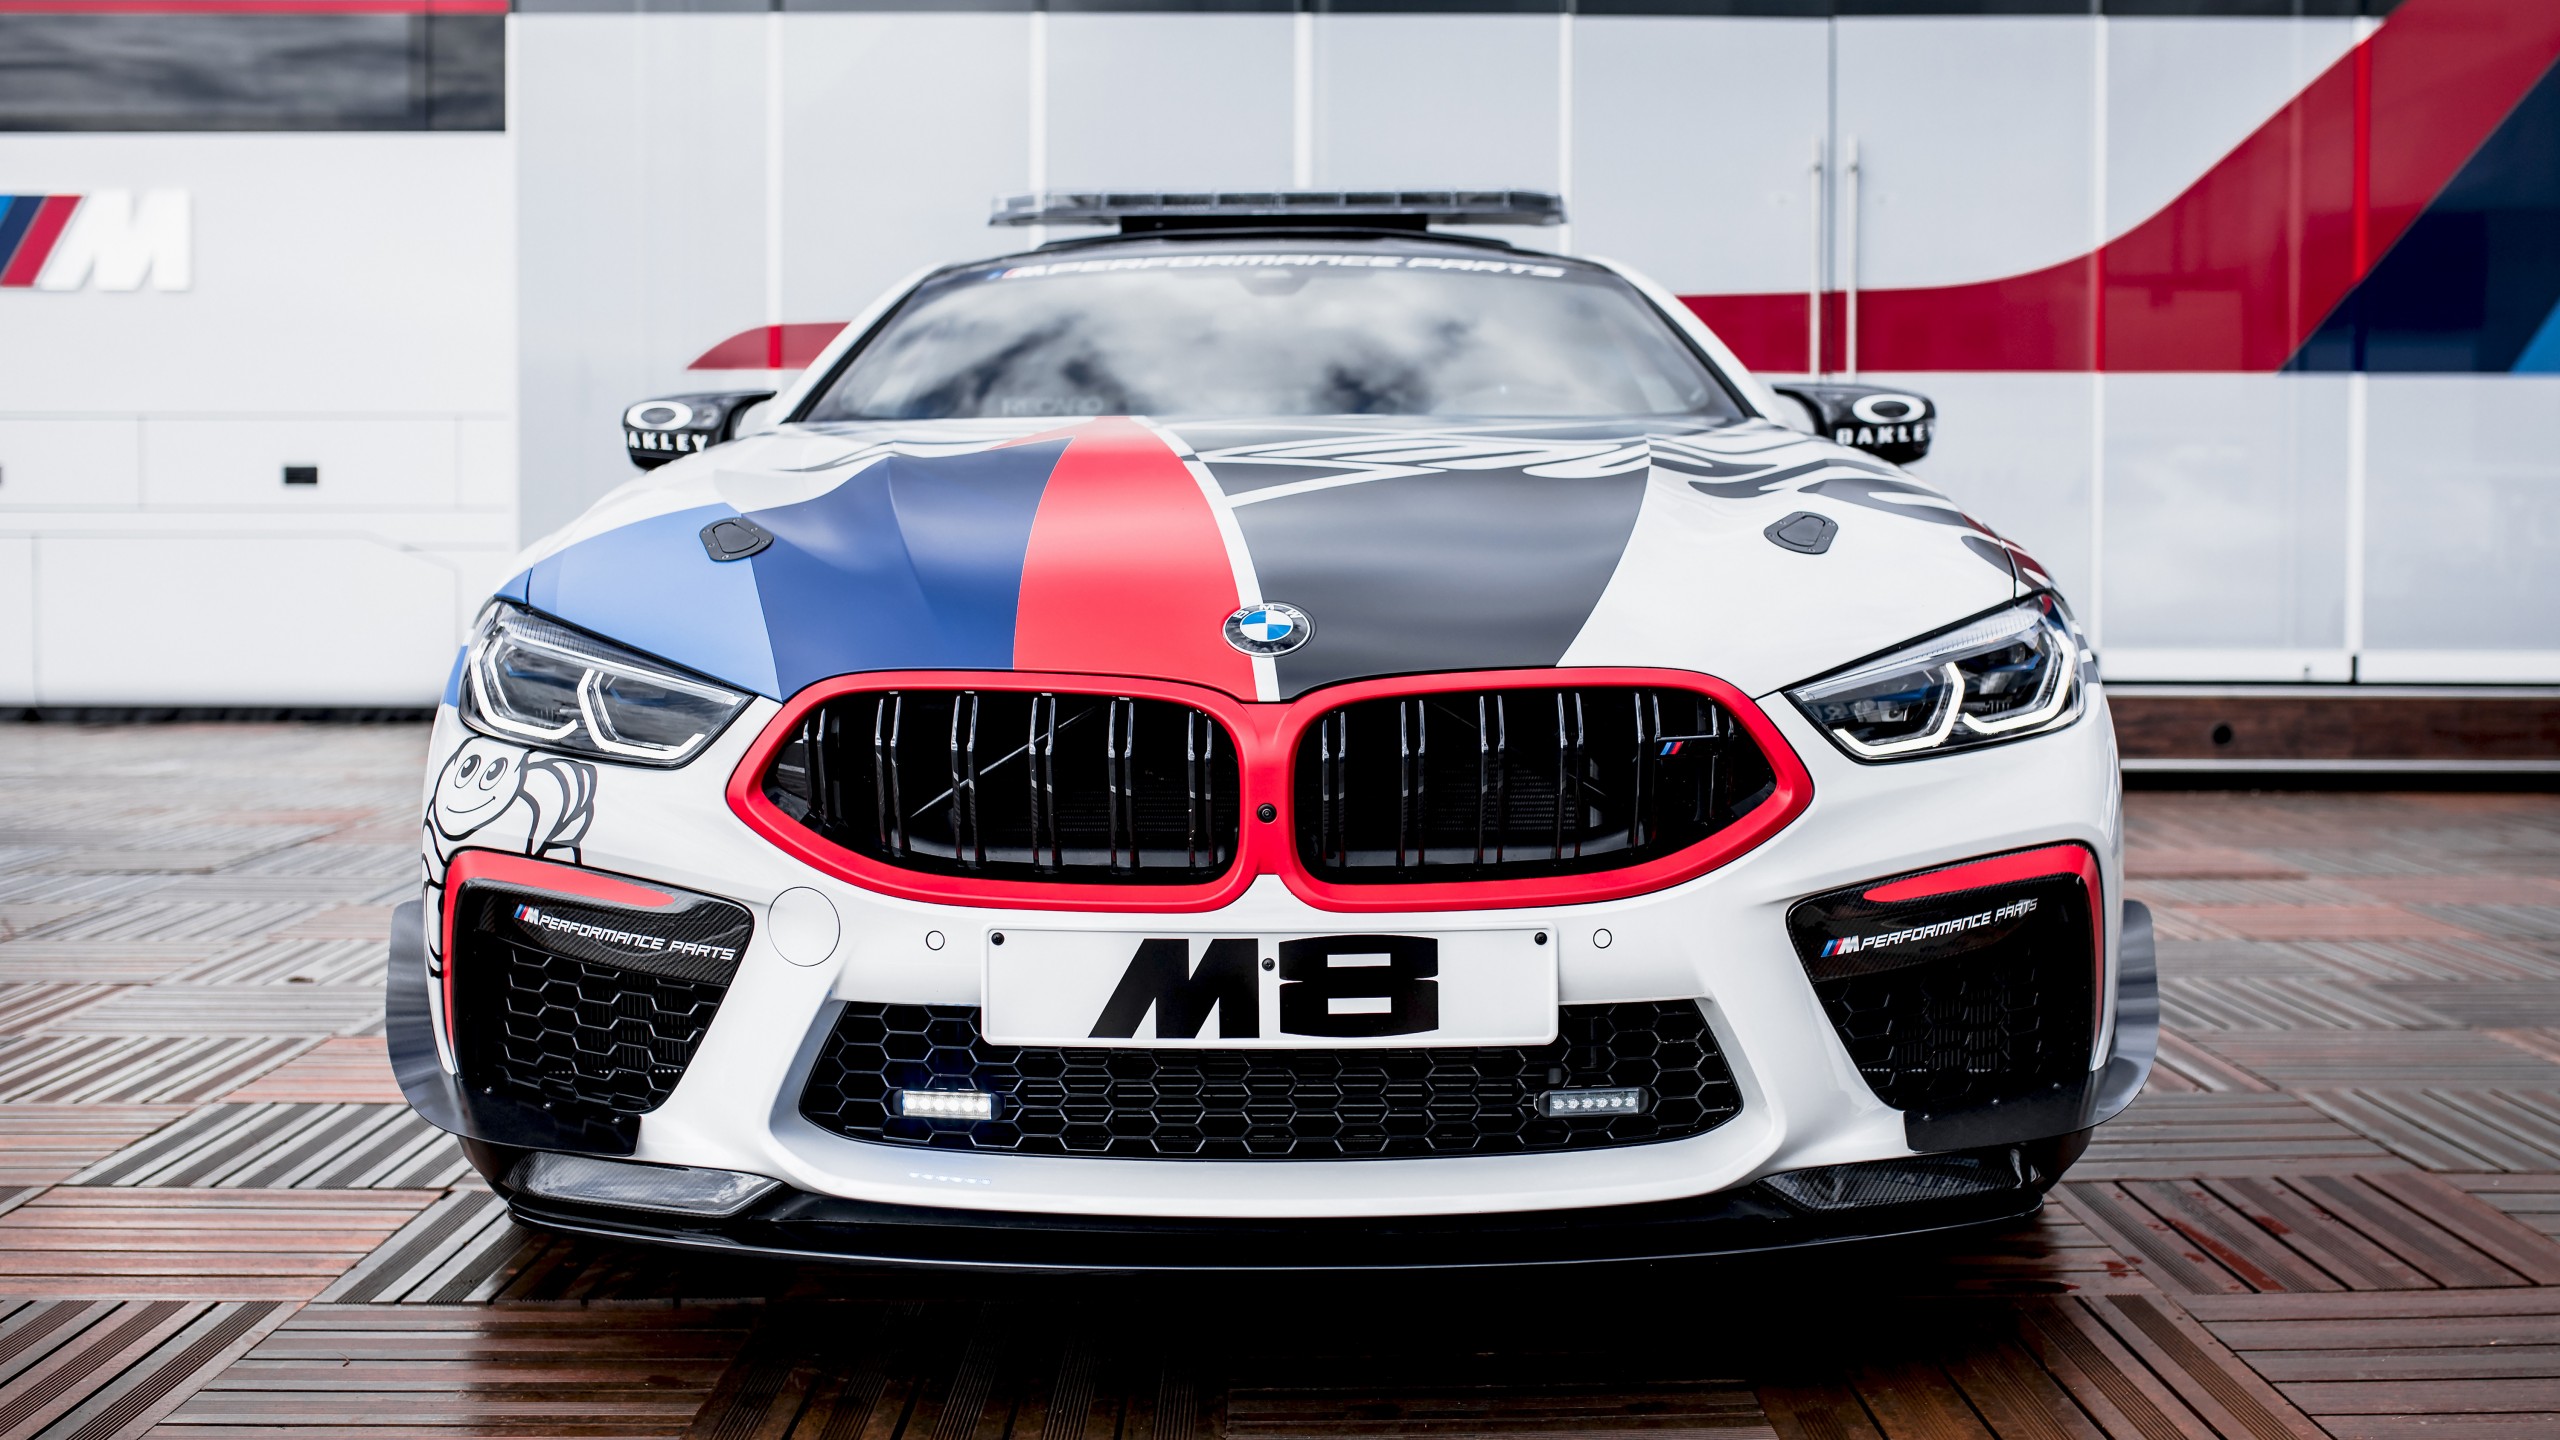 Bmw M8 Competition Coupe Motogp Safety Car 2019 5k Wallpaper Hd Car Wallpapers Id 13037